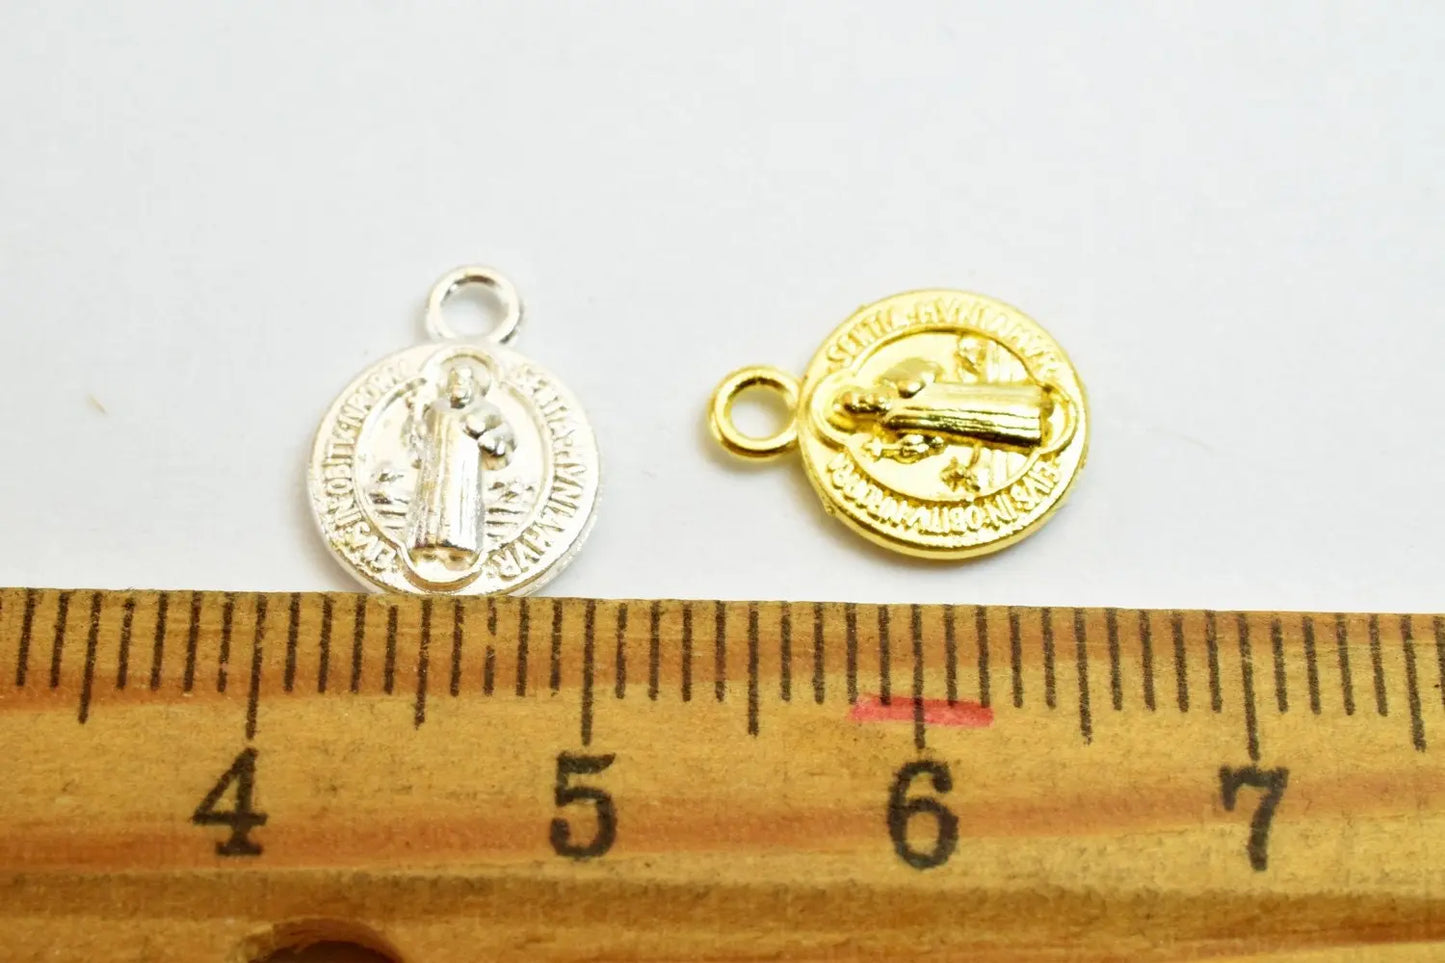 50PCs Saint Benedict Catholic Religious Medallions Charms San Benito Size 12.5x10mm Silver/Gold Rosary Benediction Charms For Jewelry Making - BeadsFindingDepot